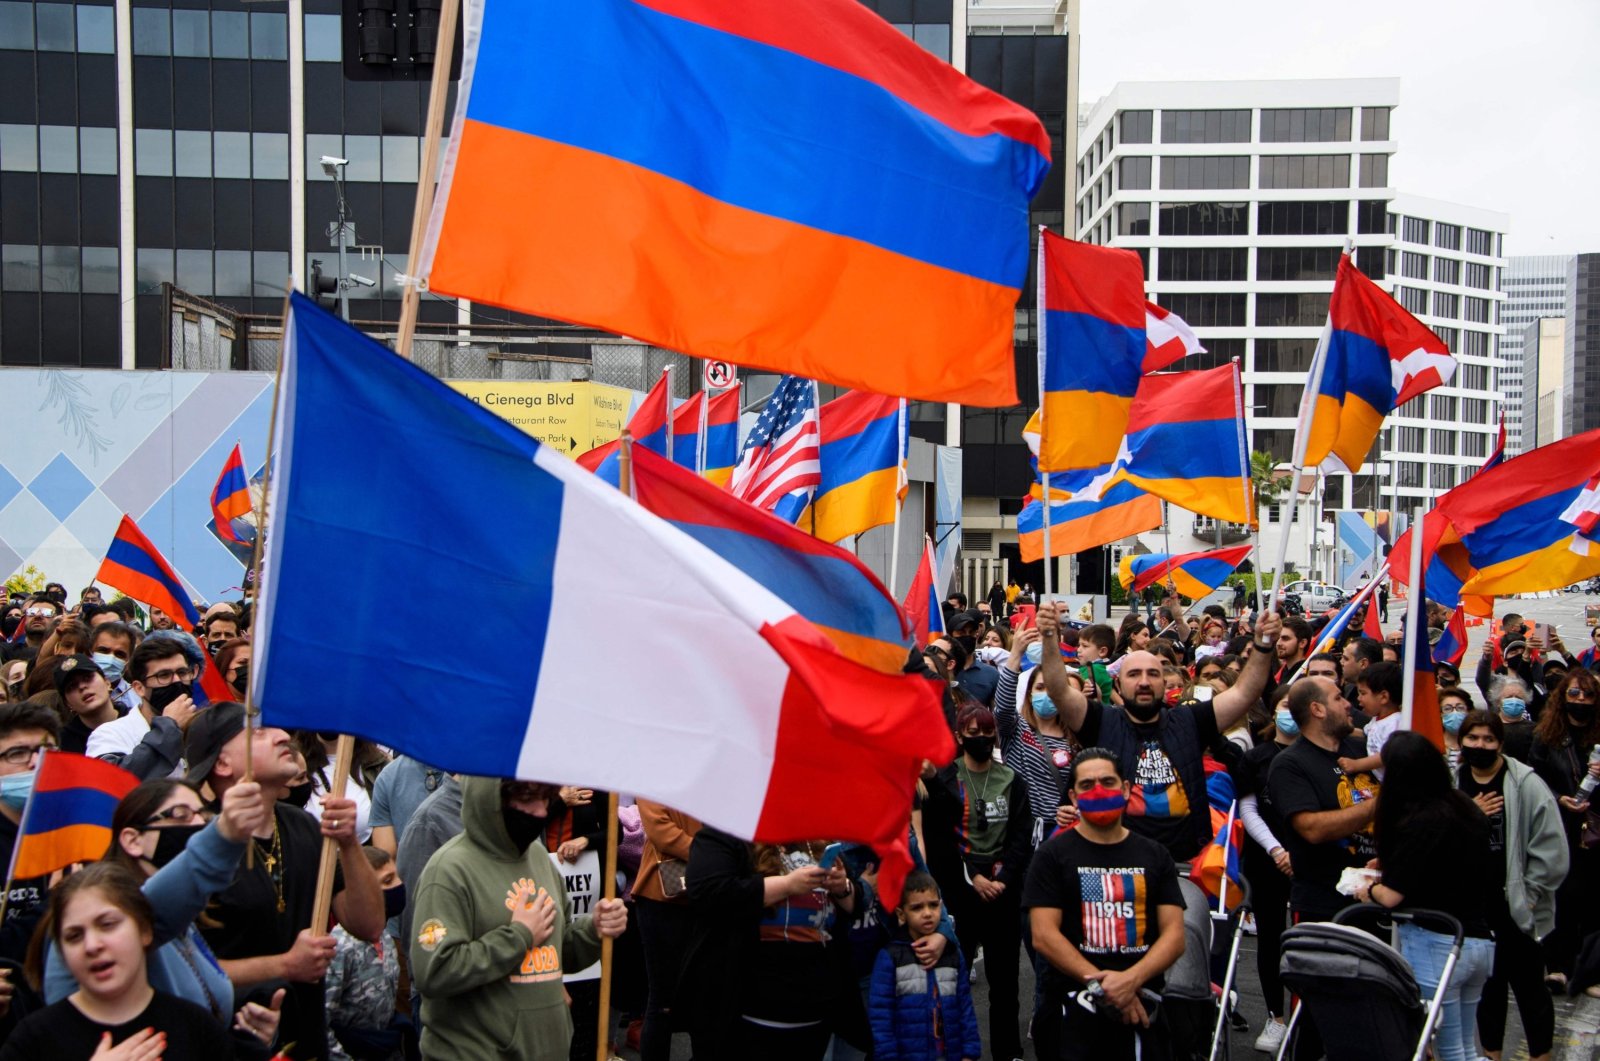 A French flag is waved alongside Armenian flags as people protest outside of the Turkish Consulate on the anniversary of the 1915 events in a demonstration organized by the Armenian Youth Federation (AYF) in Beverly Hills, California, U.S., April 24, 2021. (AFP File Photo)